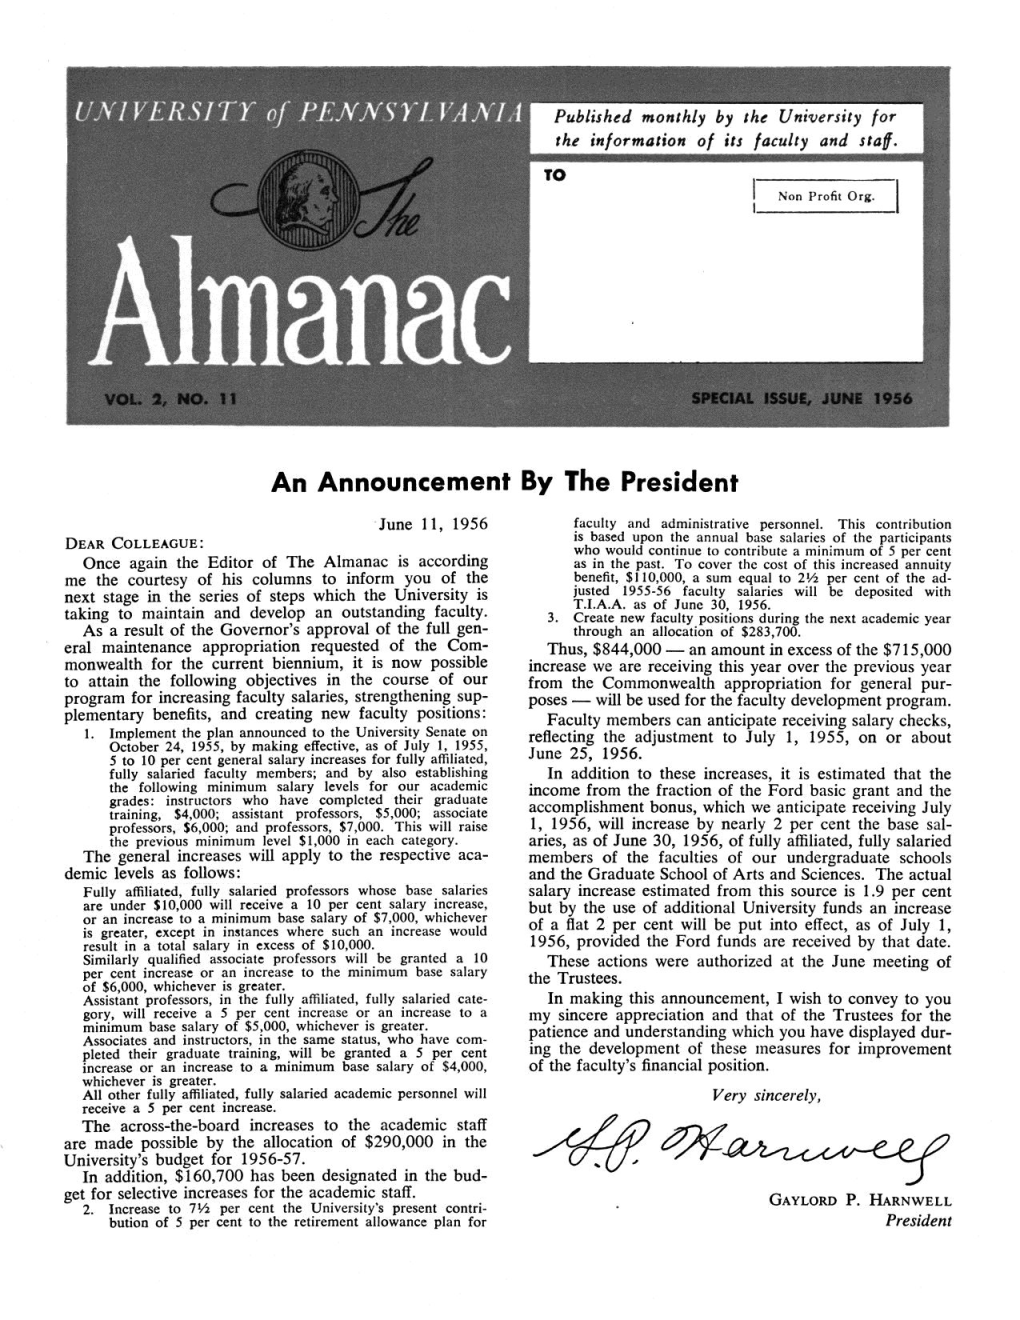 No. 11 Special Issue, June 1956